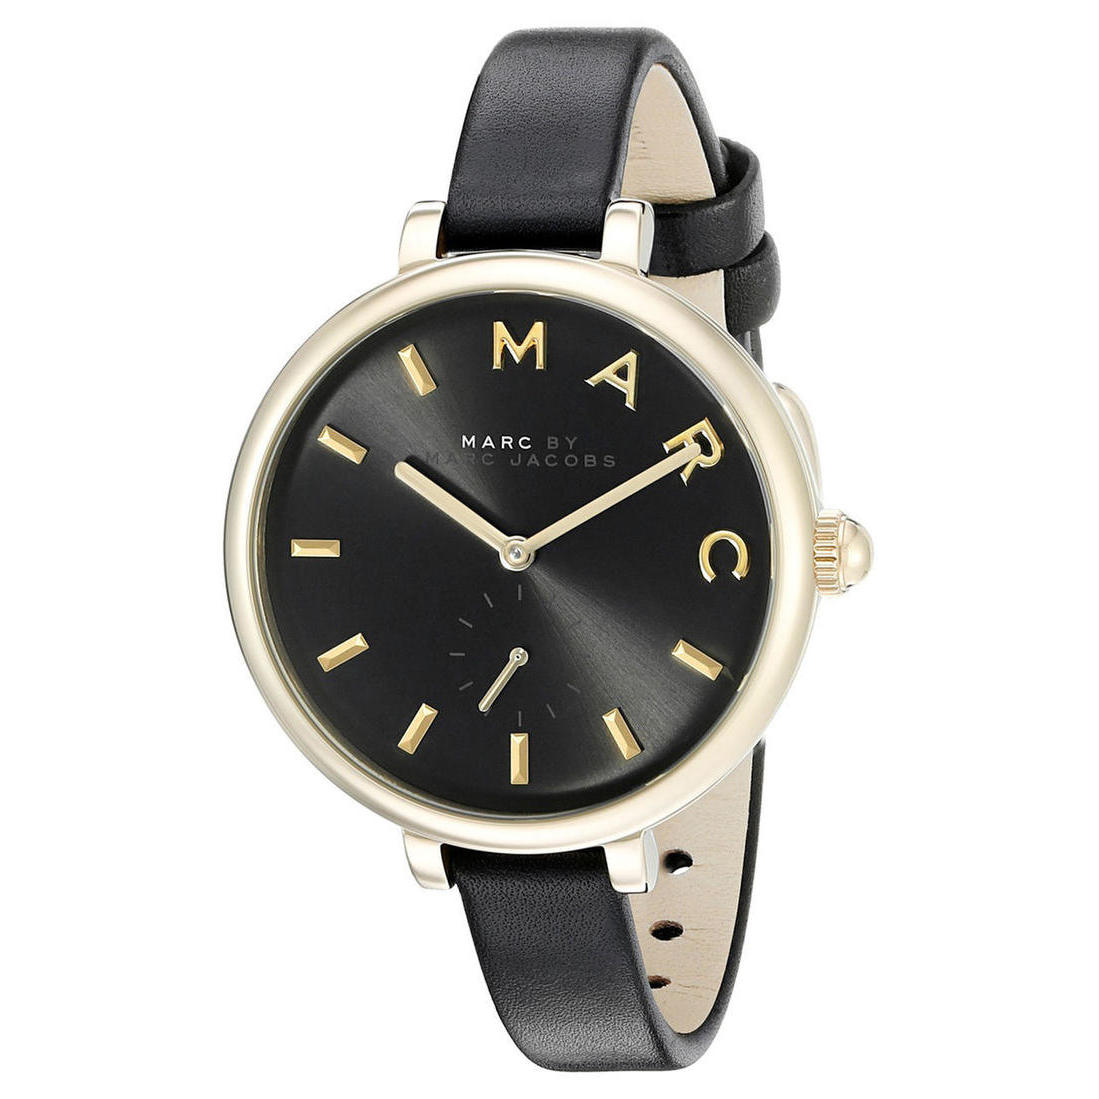 If you are looking Marc by Marc Jacobs Sally Black Sunburst Dial Women's Watch MJ1416 you can buy to tri-state, It is on sale at the best price